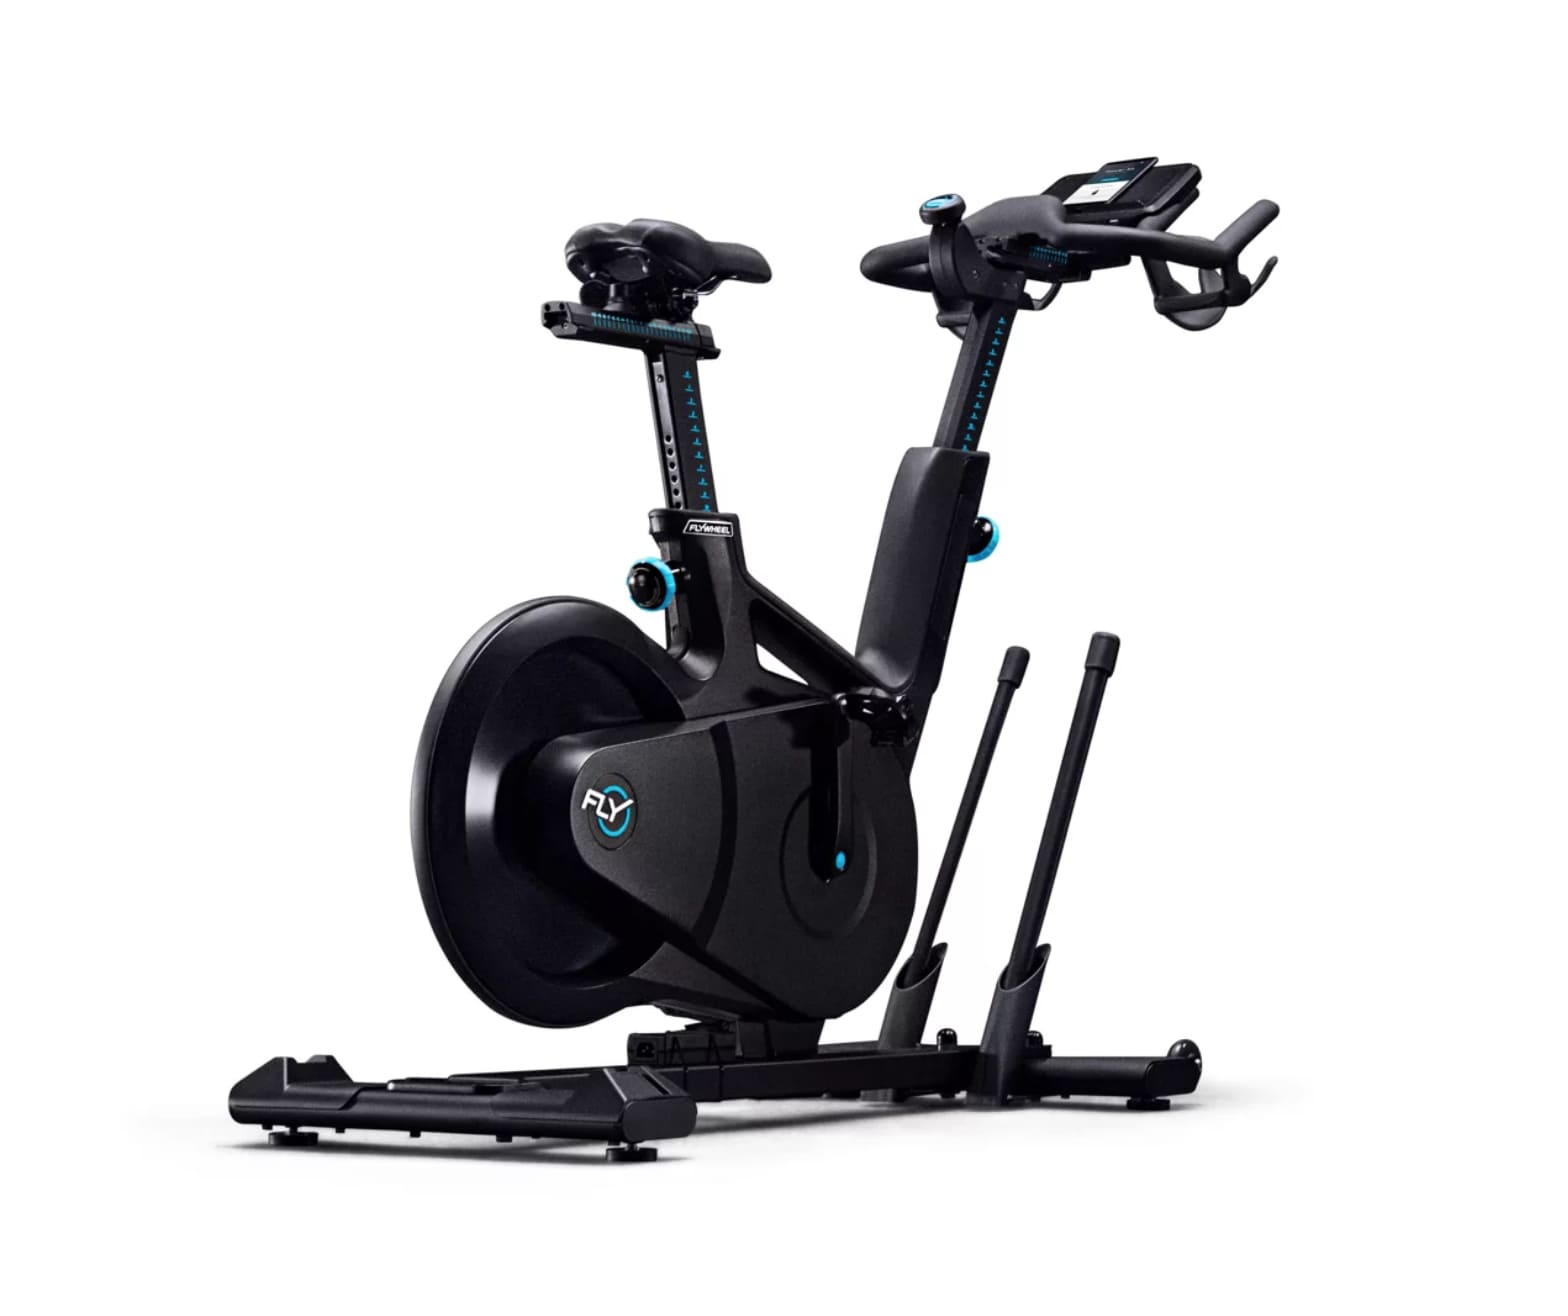 The Home Spin Bike Showdown Here’s How They Measure Up on Cost